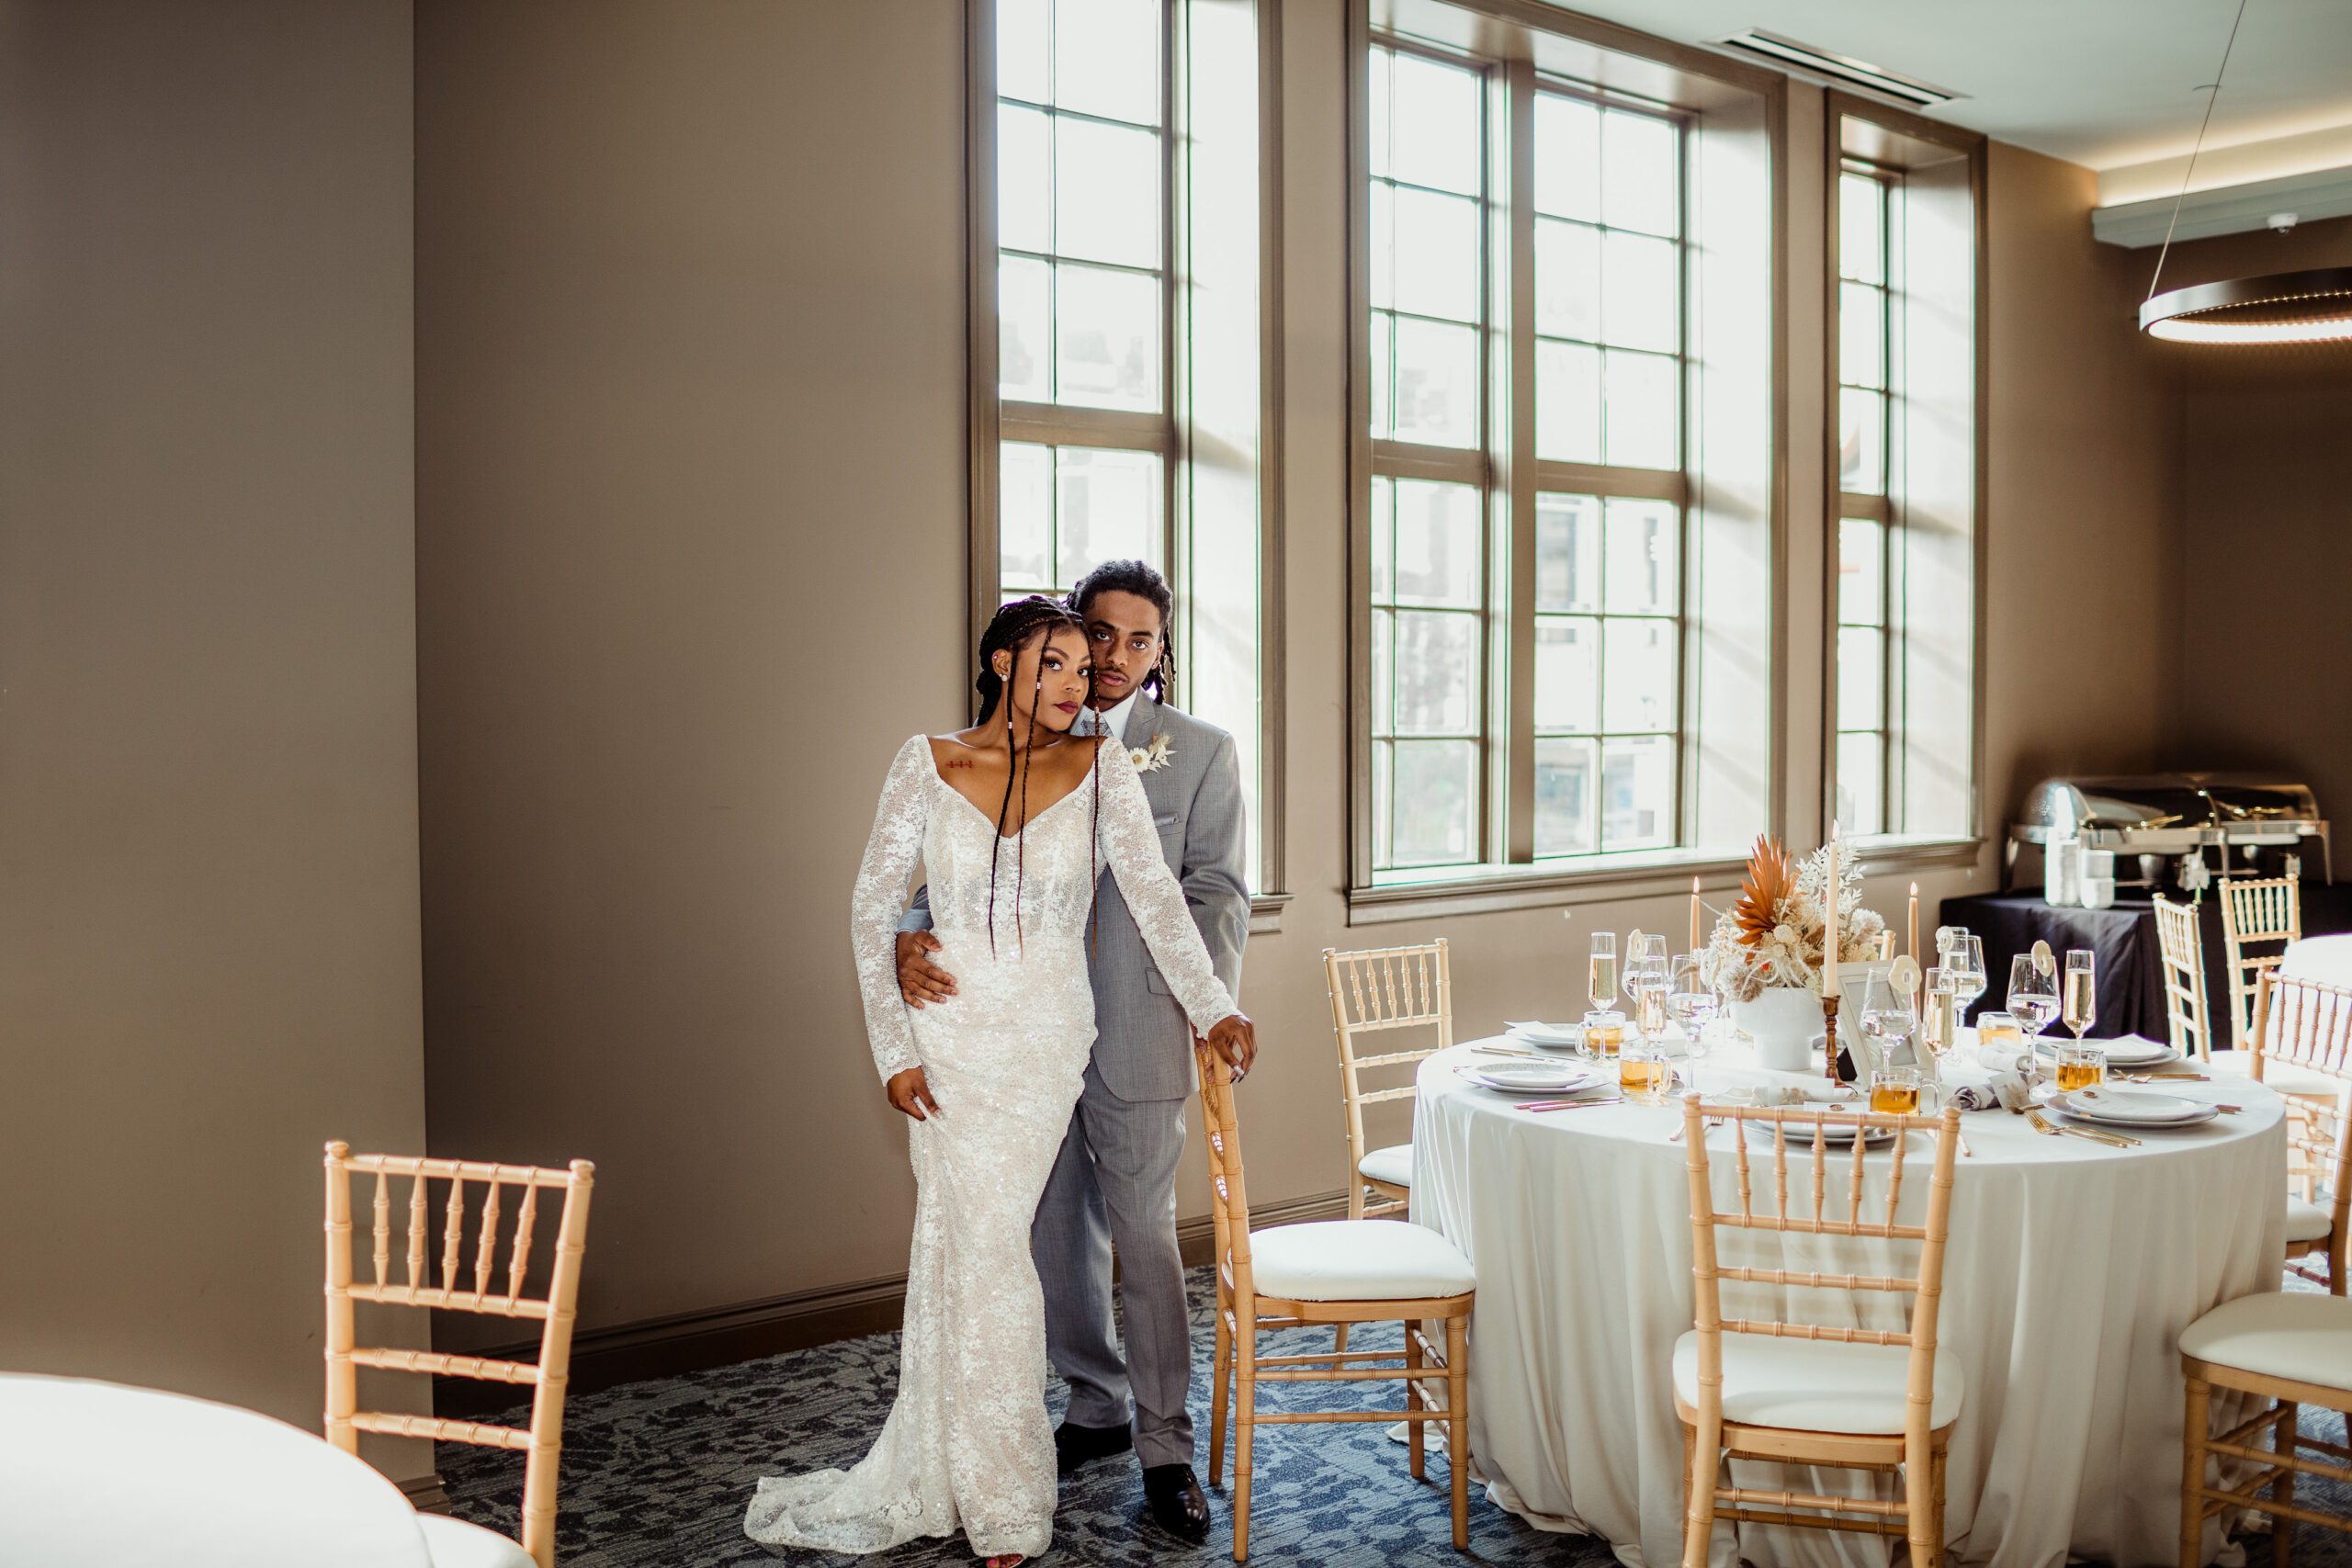 A ‘Chic-Neutrals’ Dream Styled Shoot